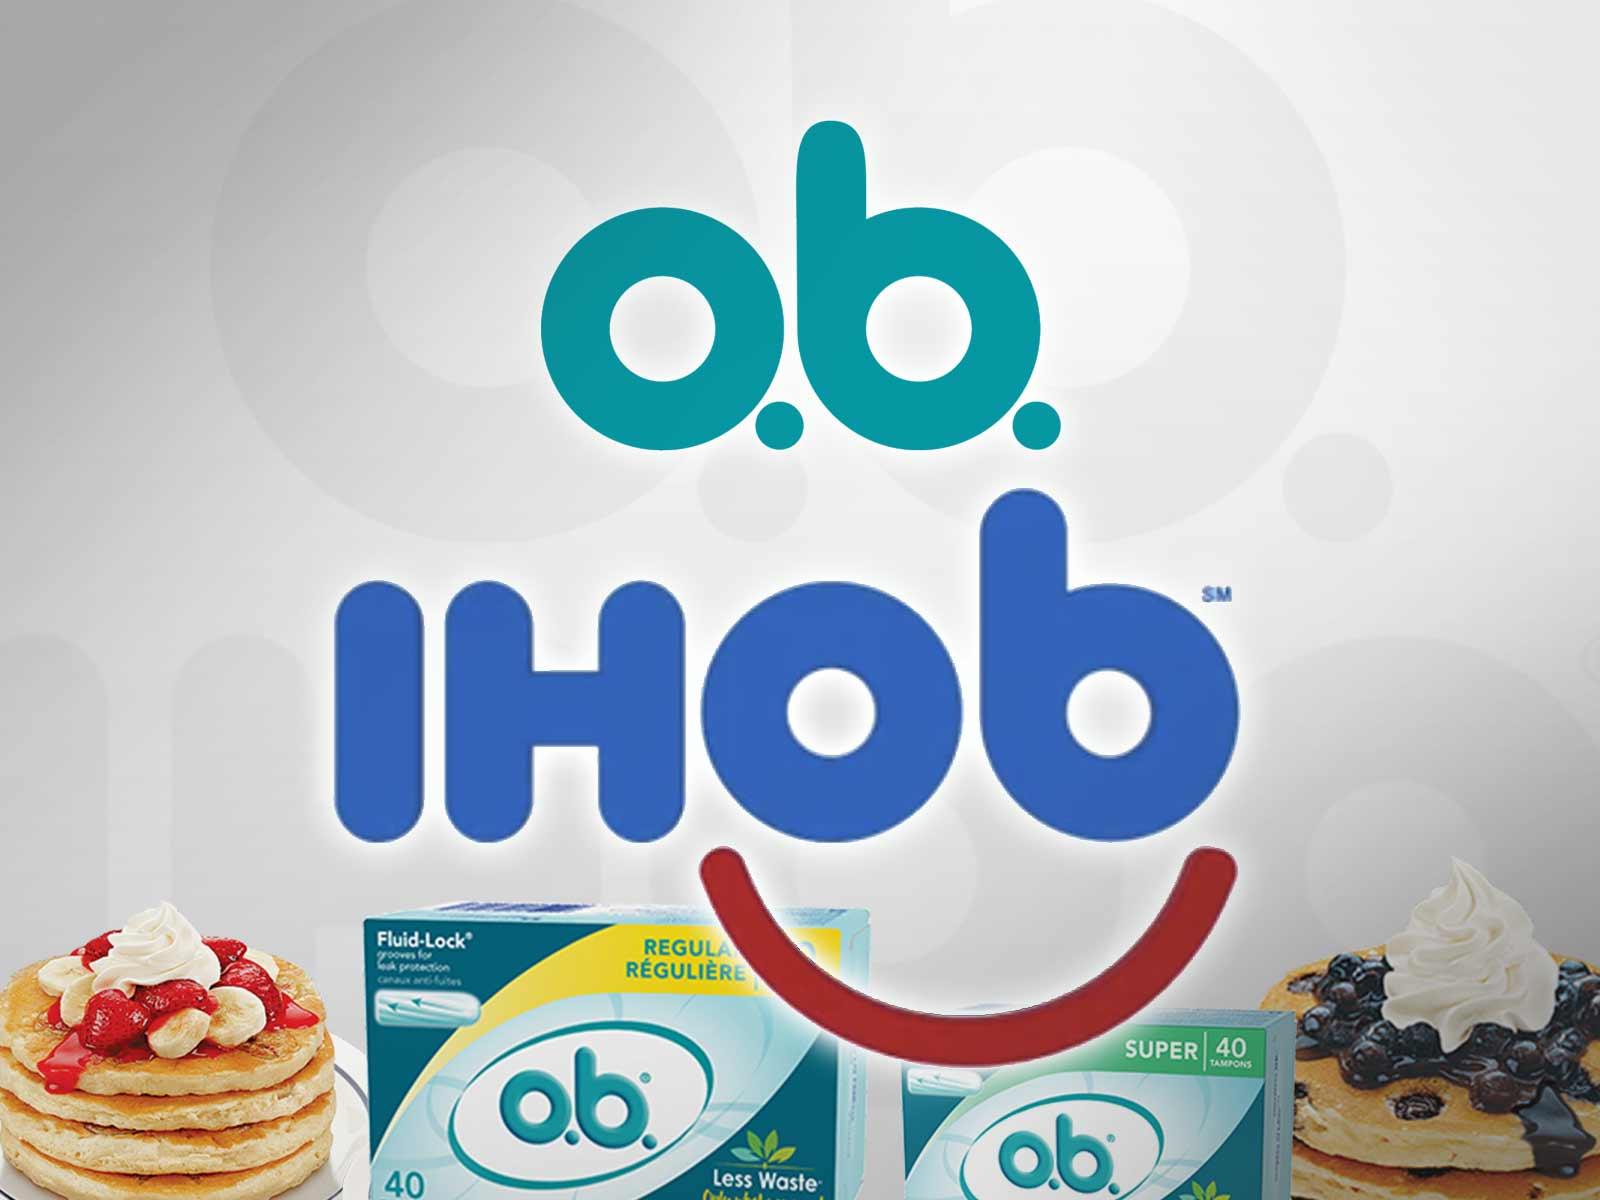 O.B. Tampons ‘Flattered’ That IHOP’s New Logo Looks Like Theirs, But Offers a Warning …